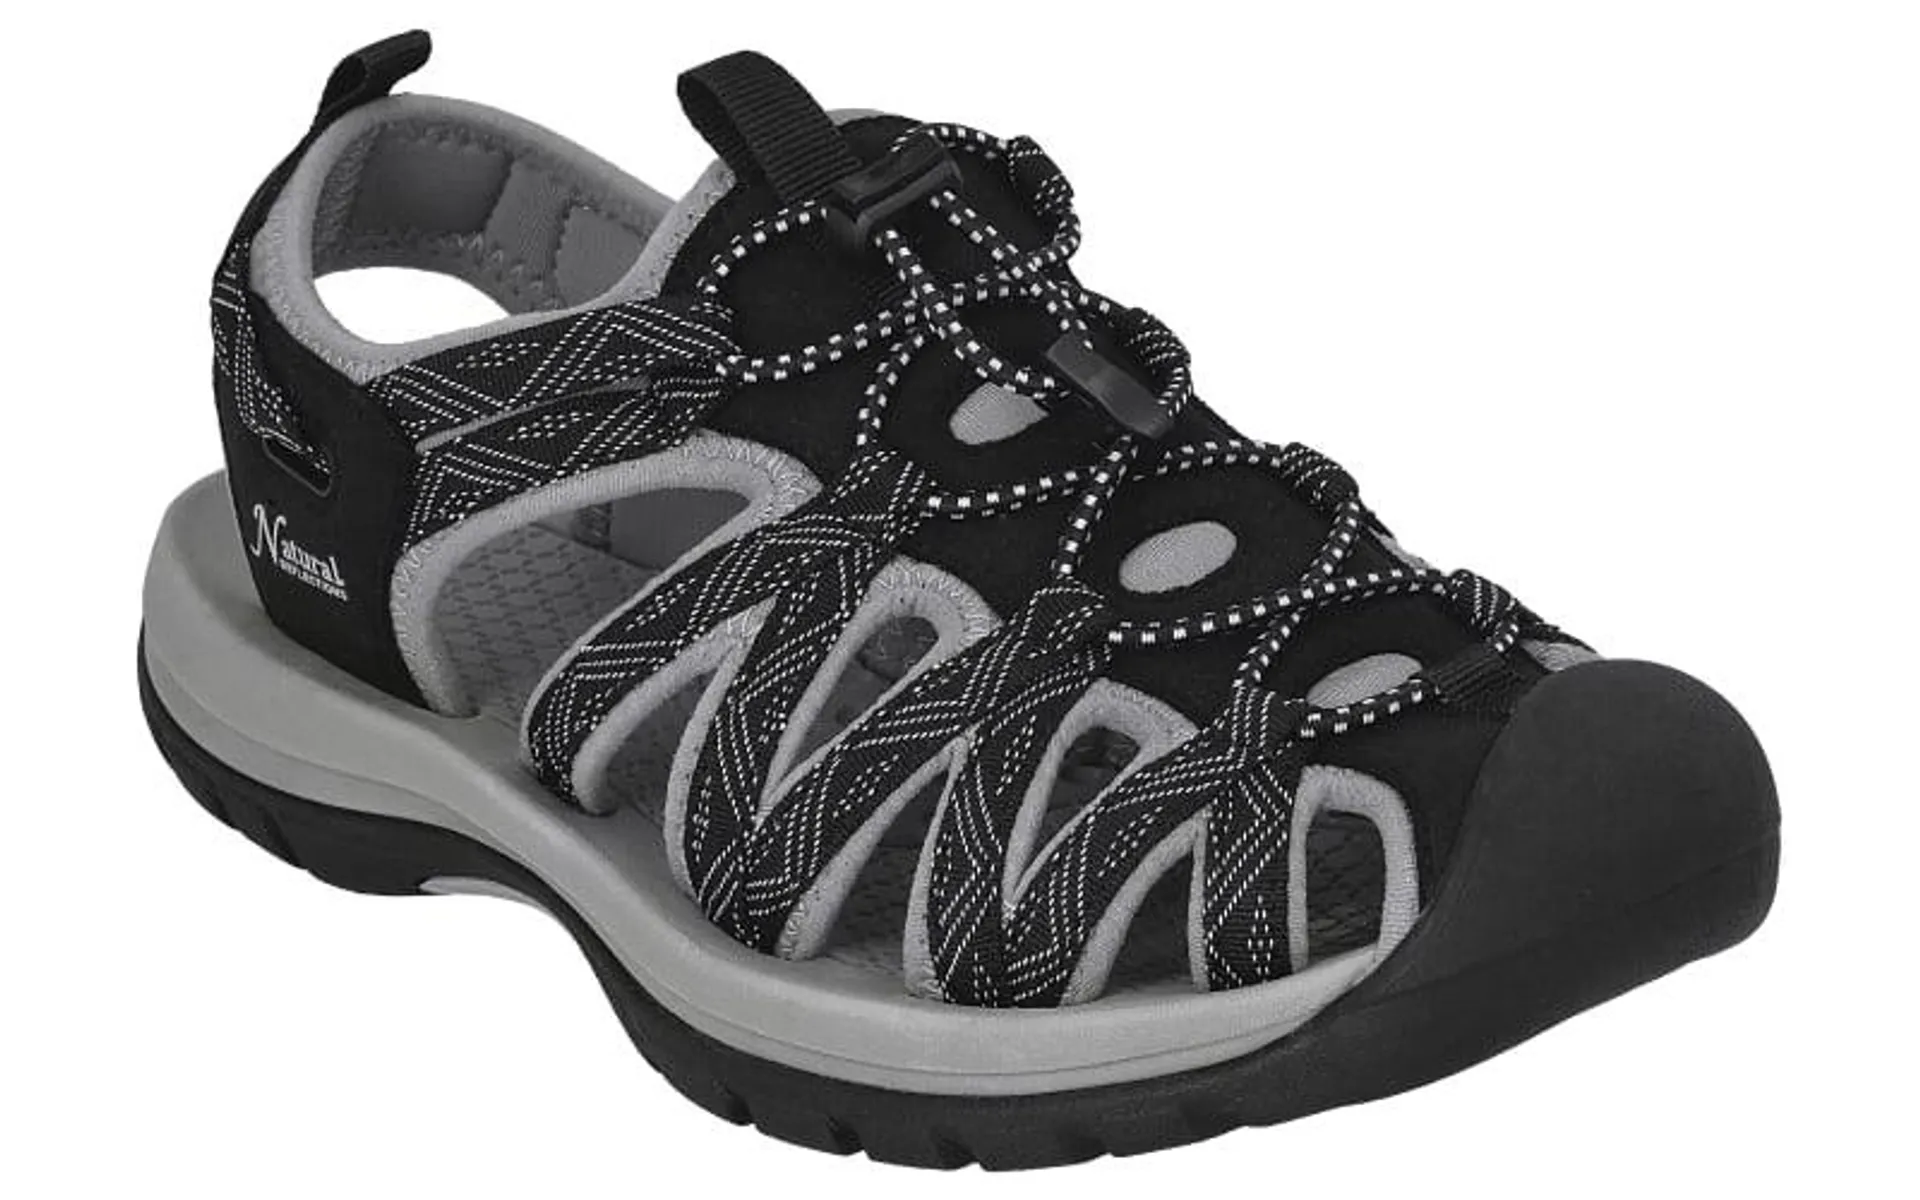 Natural Reflections Island Falls Water Shoes for Ladies